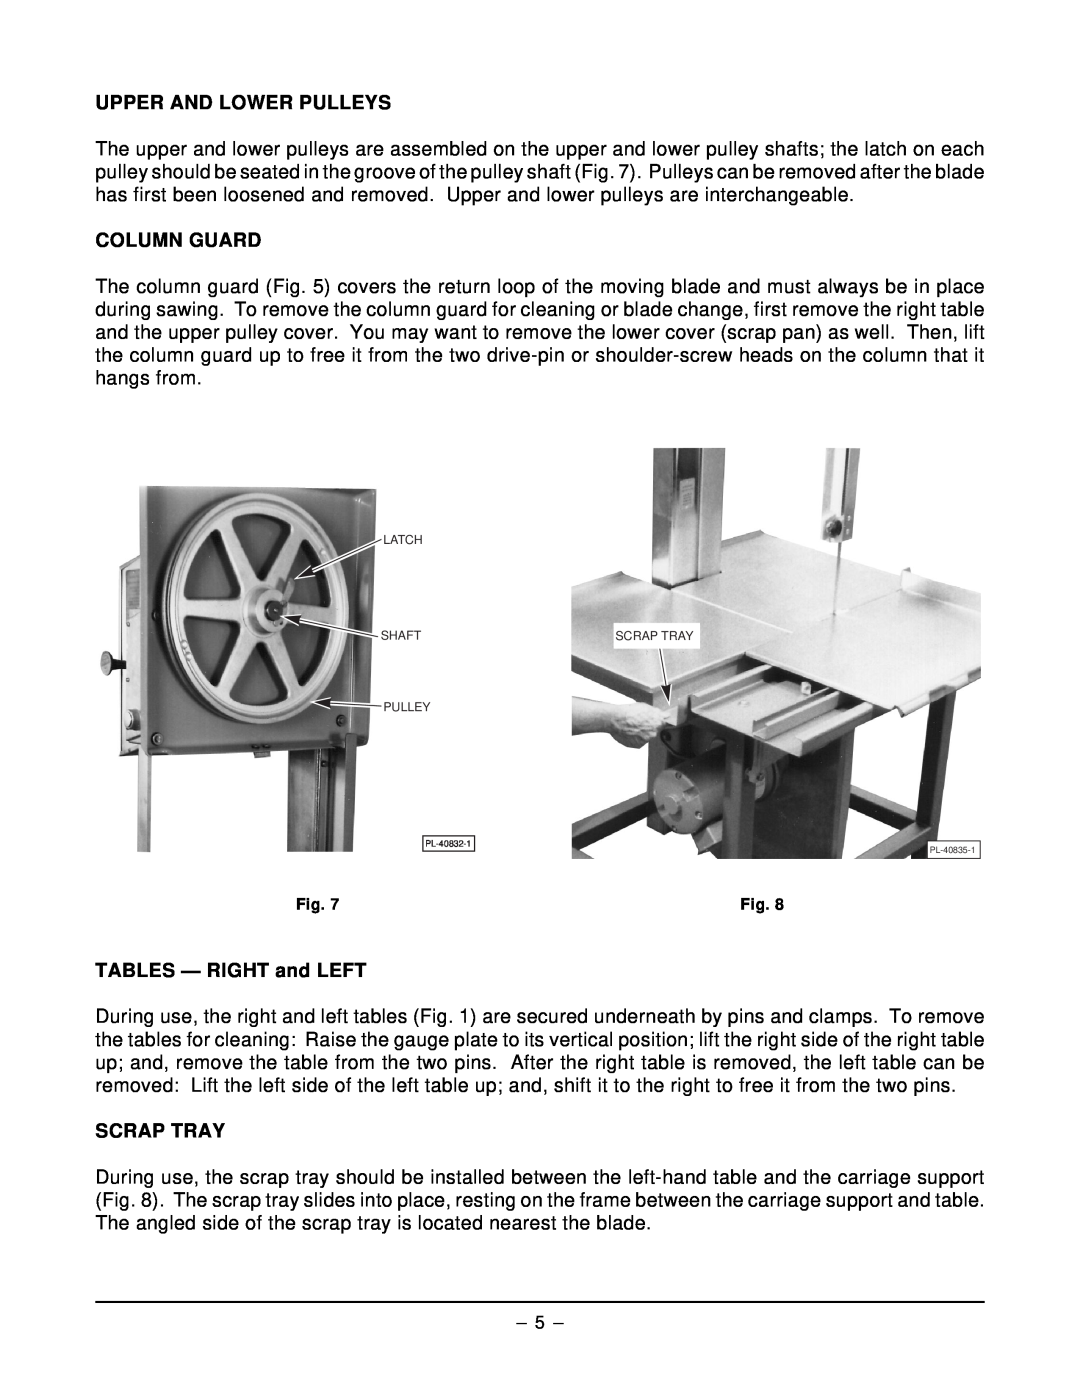 Hobart 5801 manual Upper And Lower Pulleys, Column Guard, TABLES - RIGHT and LEFT, Scrap Tray, Latch, Shaft 